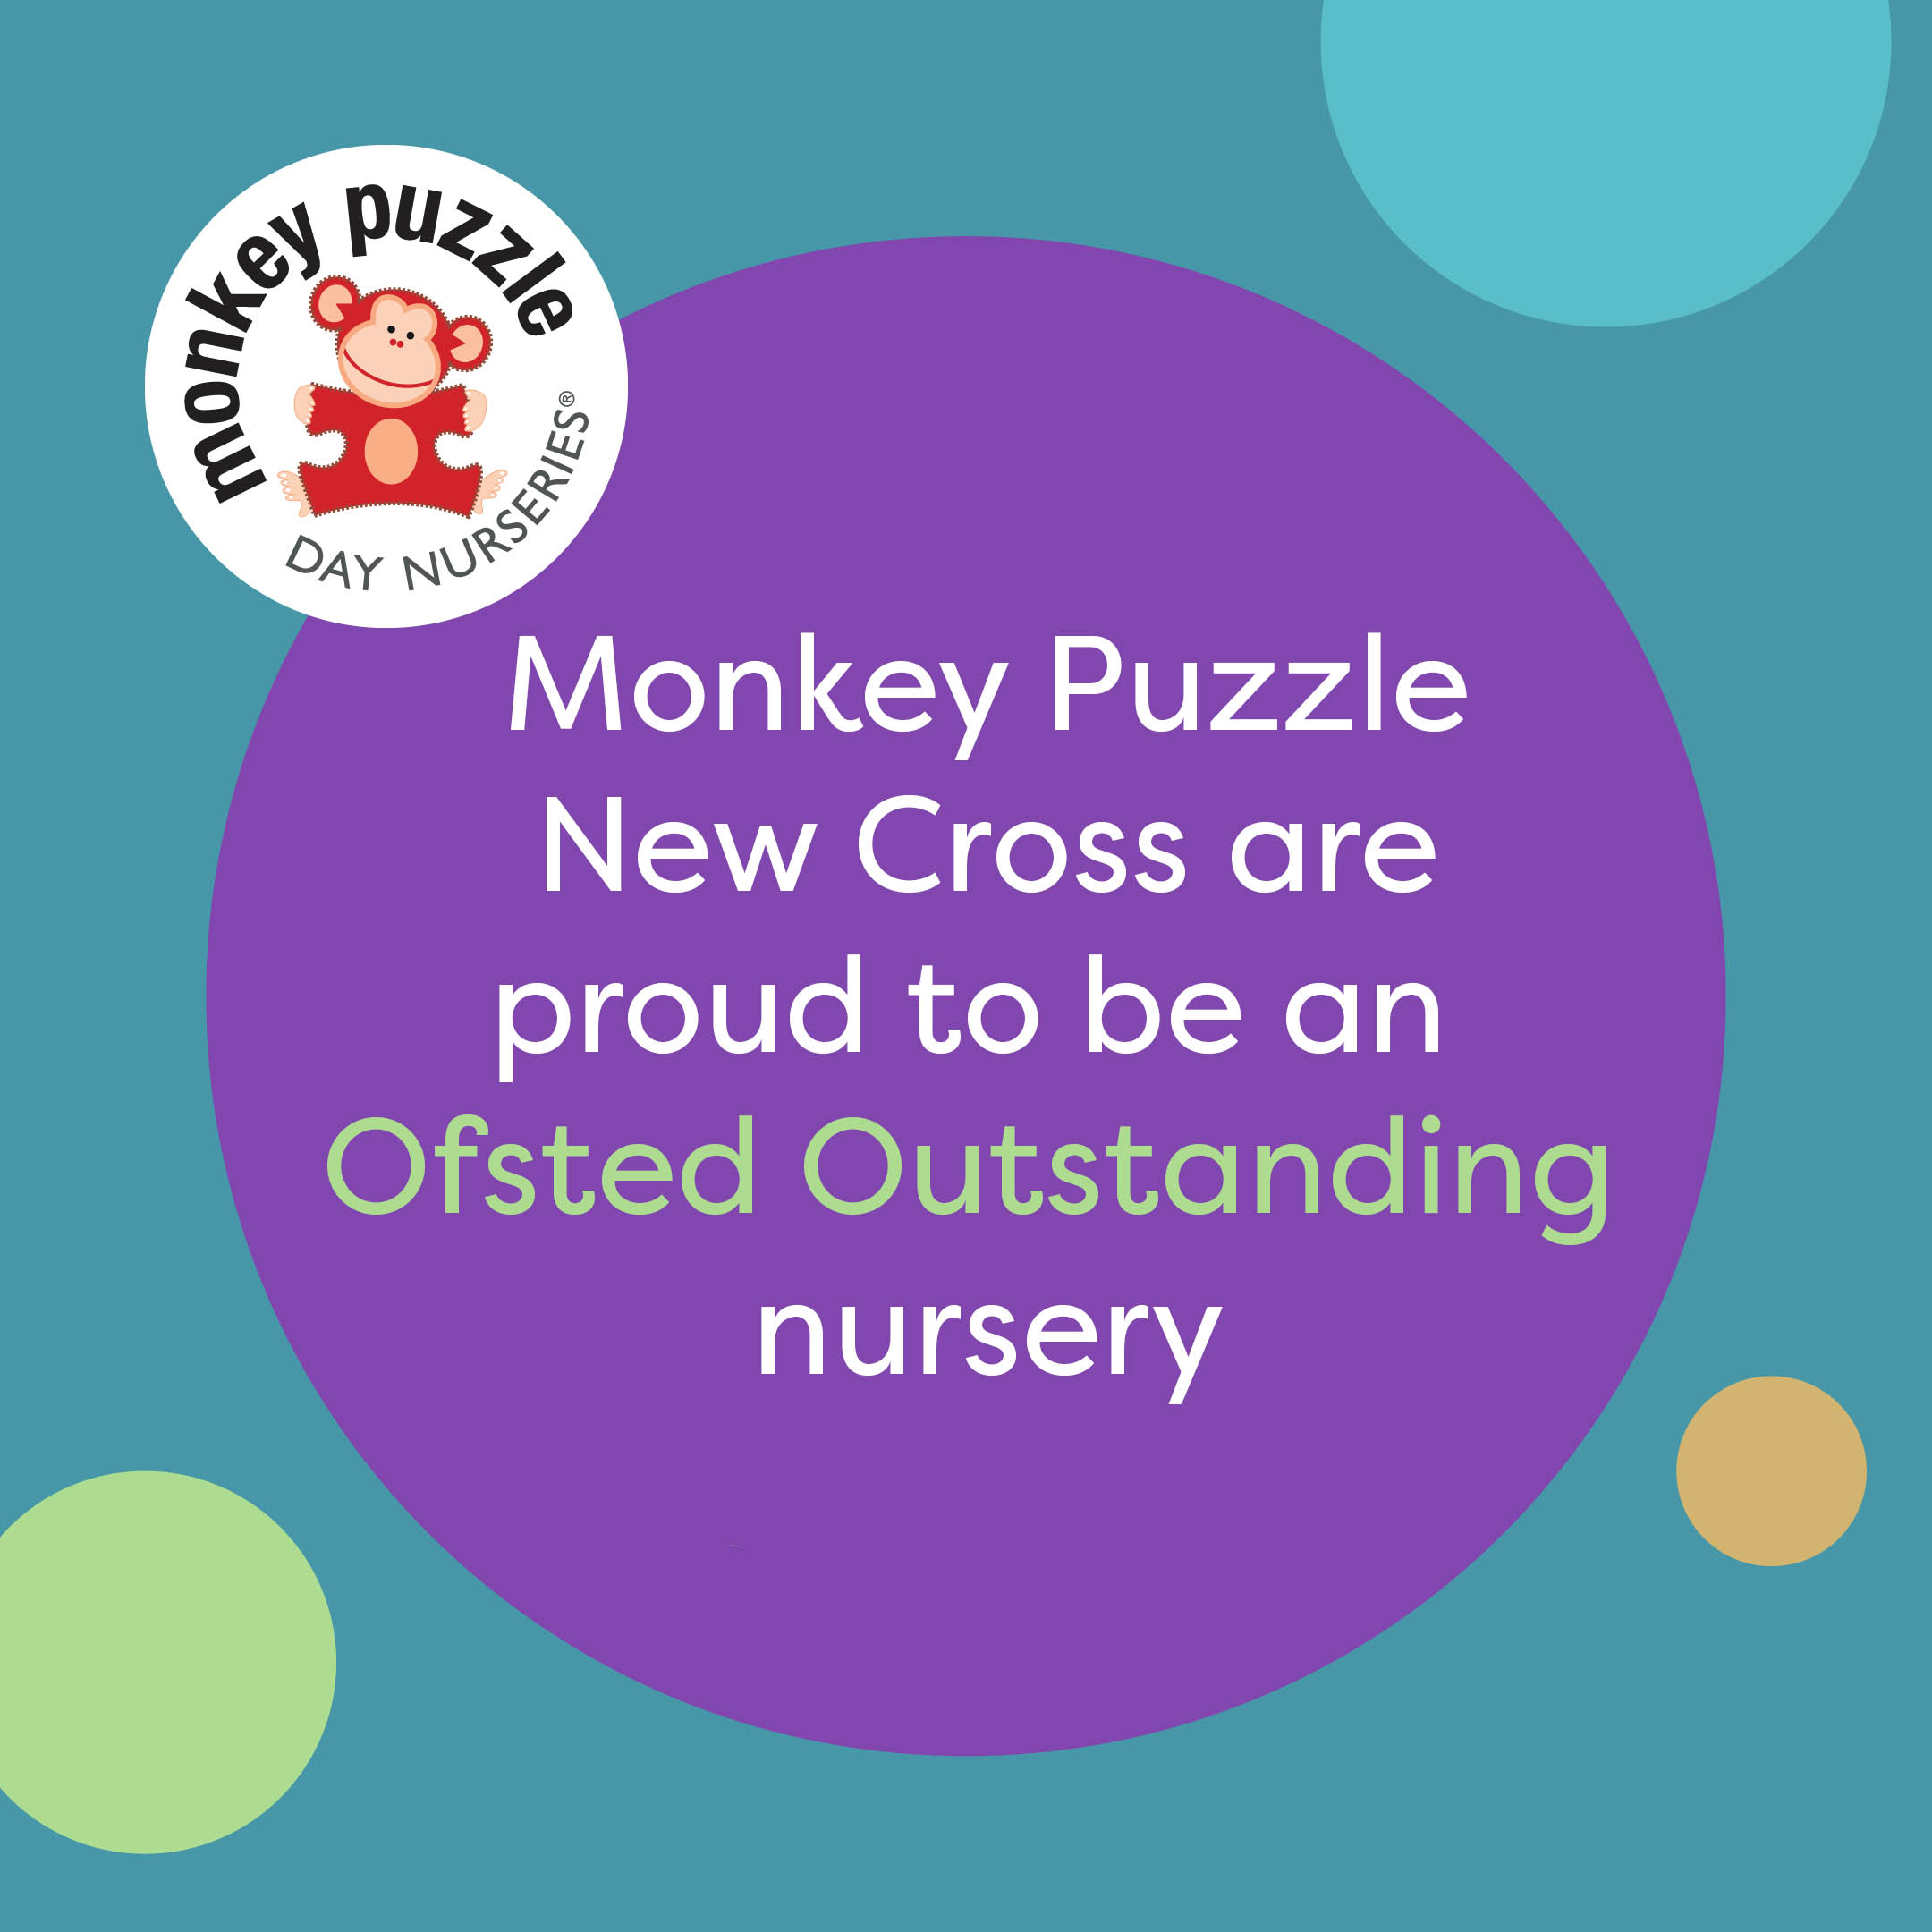 Monkey Puzzle New Cross are proud to be an Ofsted Outstanding nursery